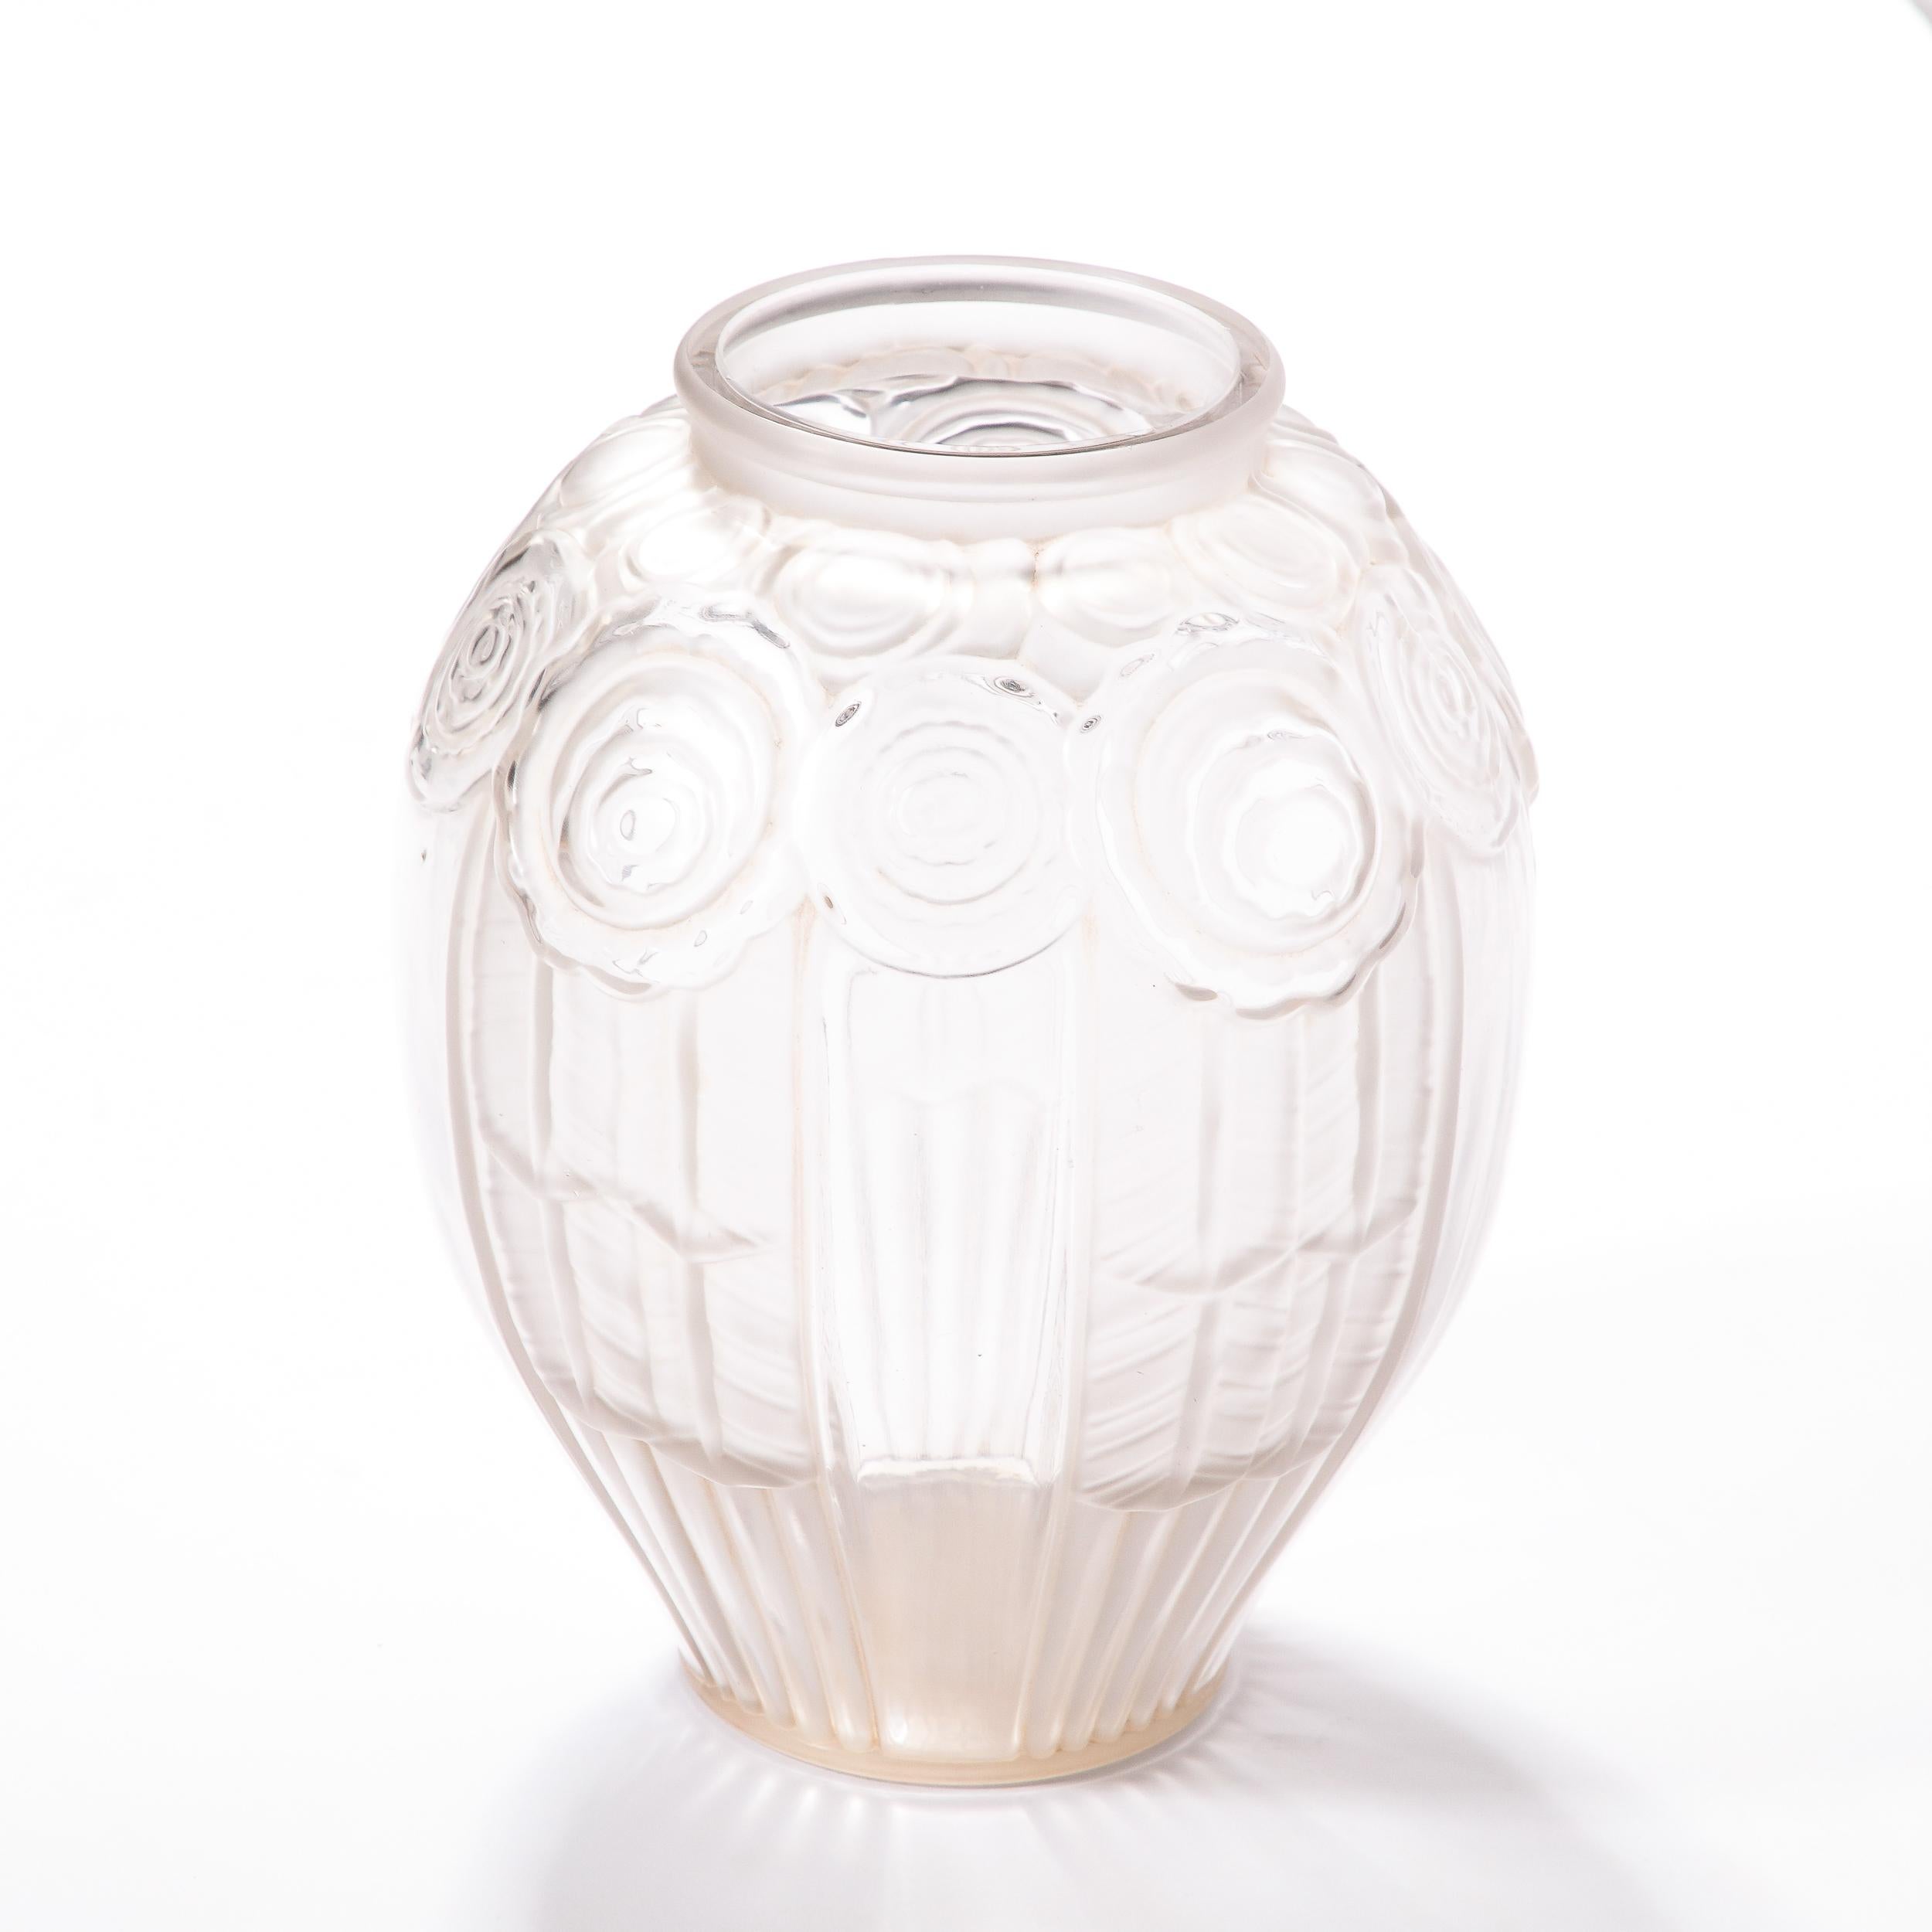 Art Deco Andrea Hunebelle Translucent Frosted Tinted Glass Vase with Rose Detailing